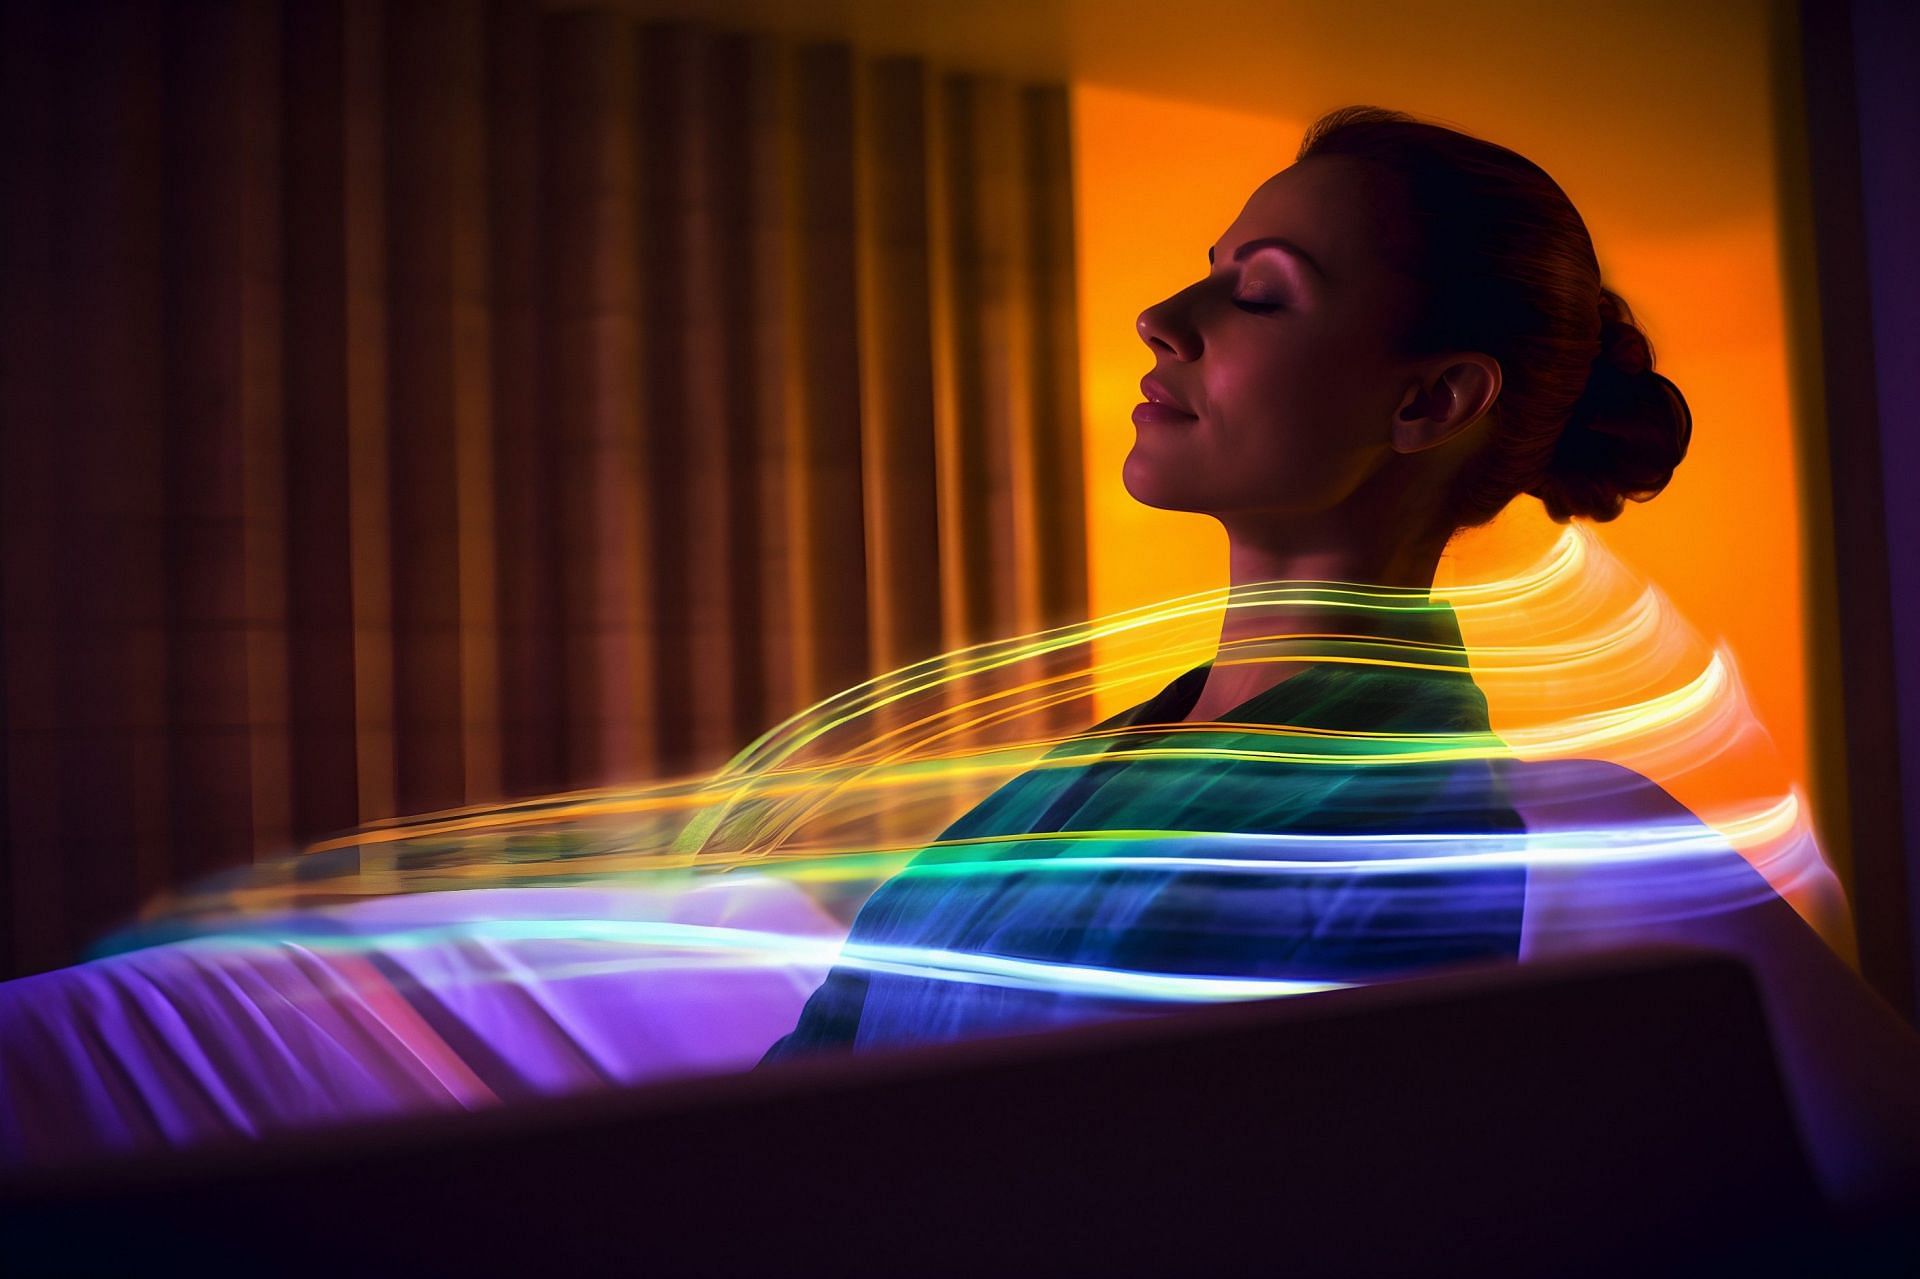 The benefits of light therapy are not just limited to physical health and can be used to alleviate mental distress. (Image via Vecteezy/ Oleksandr Migur)